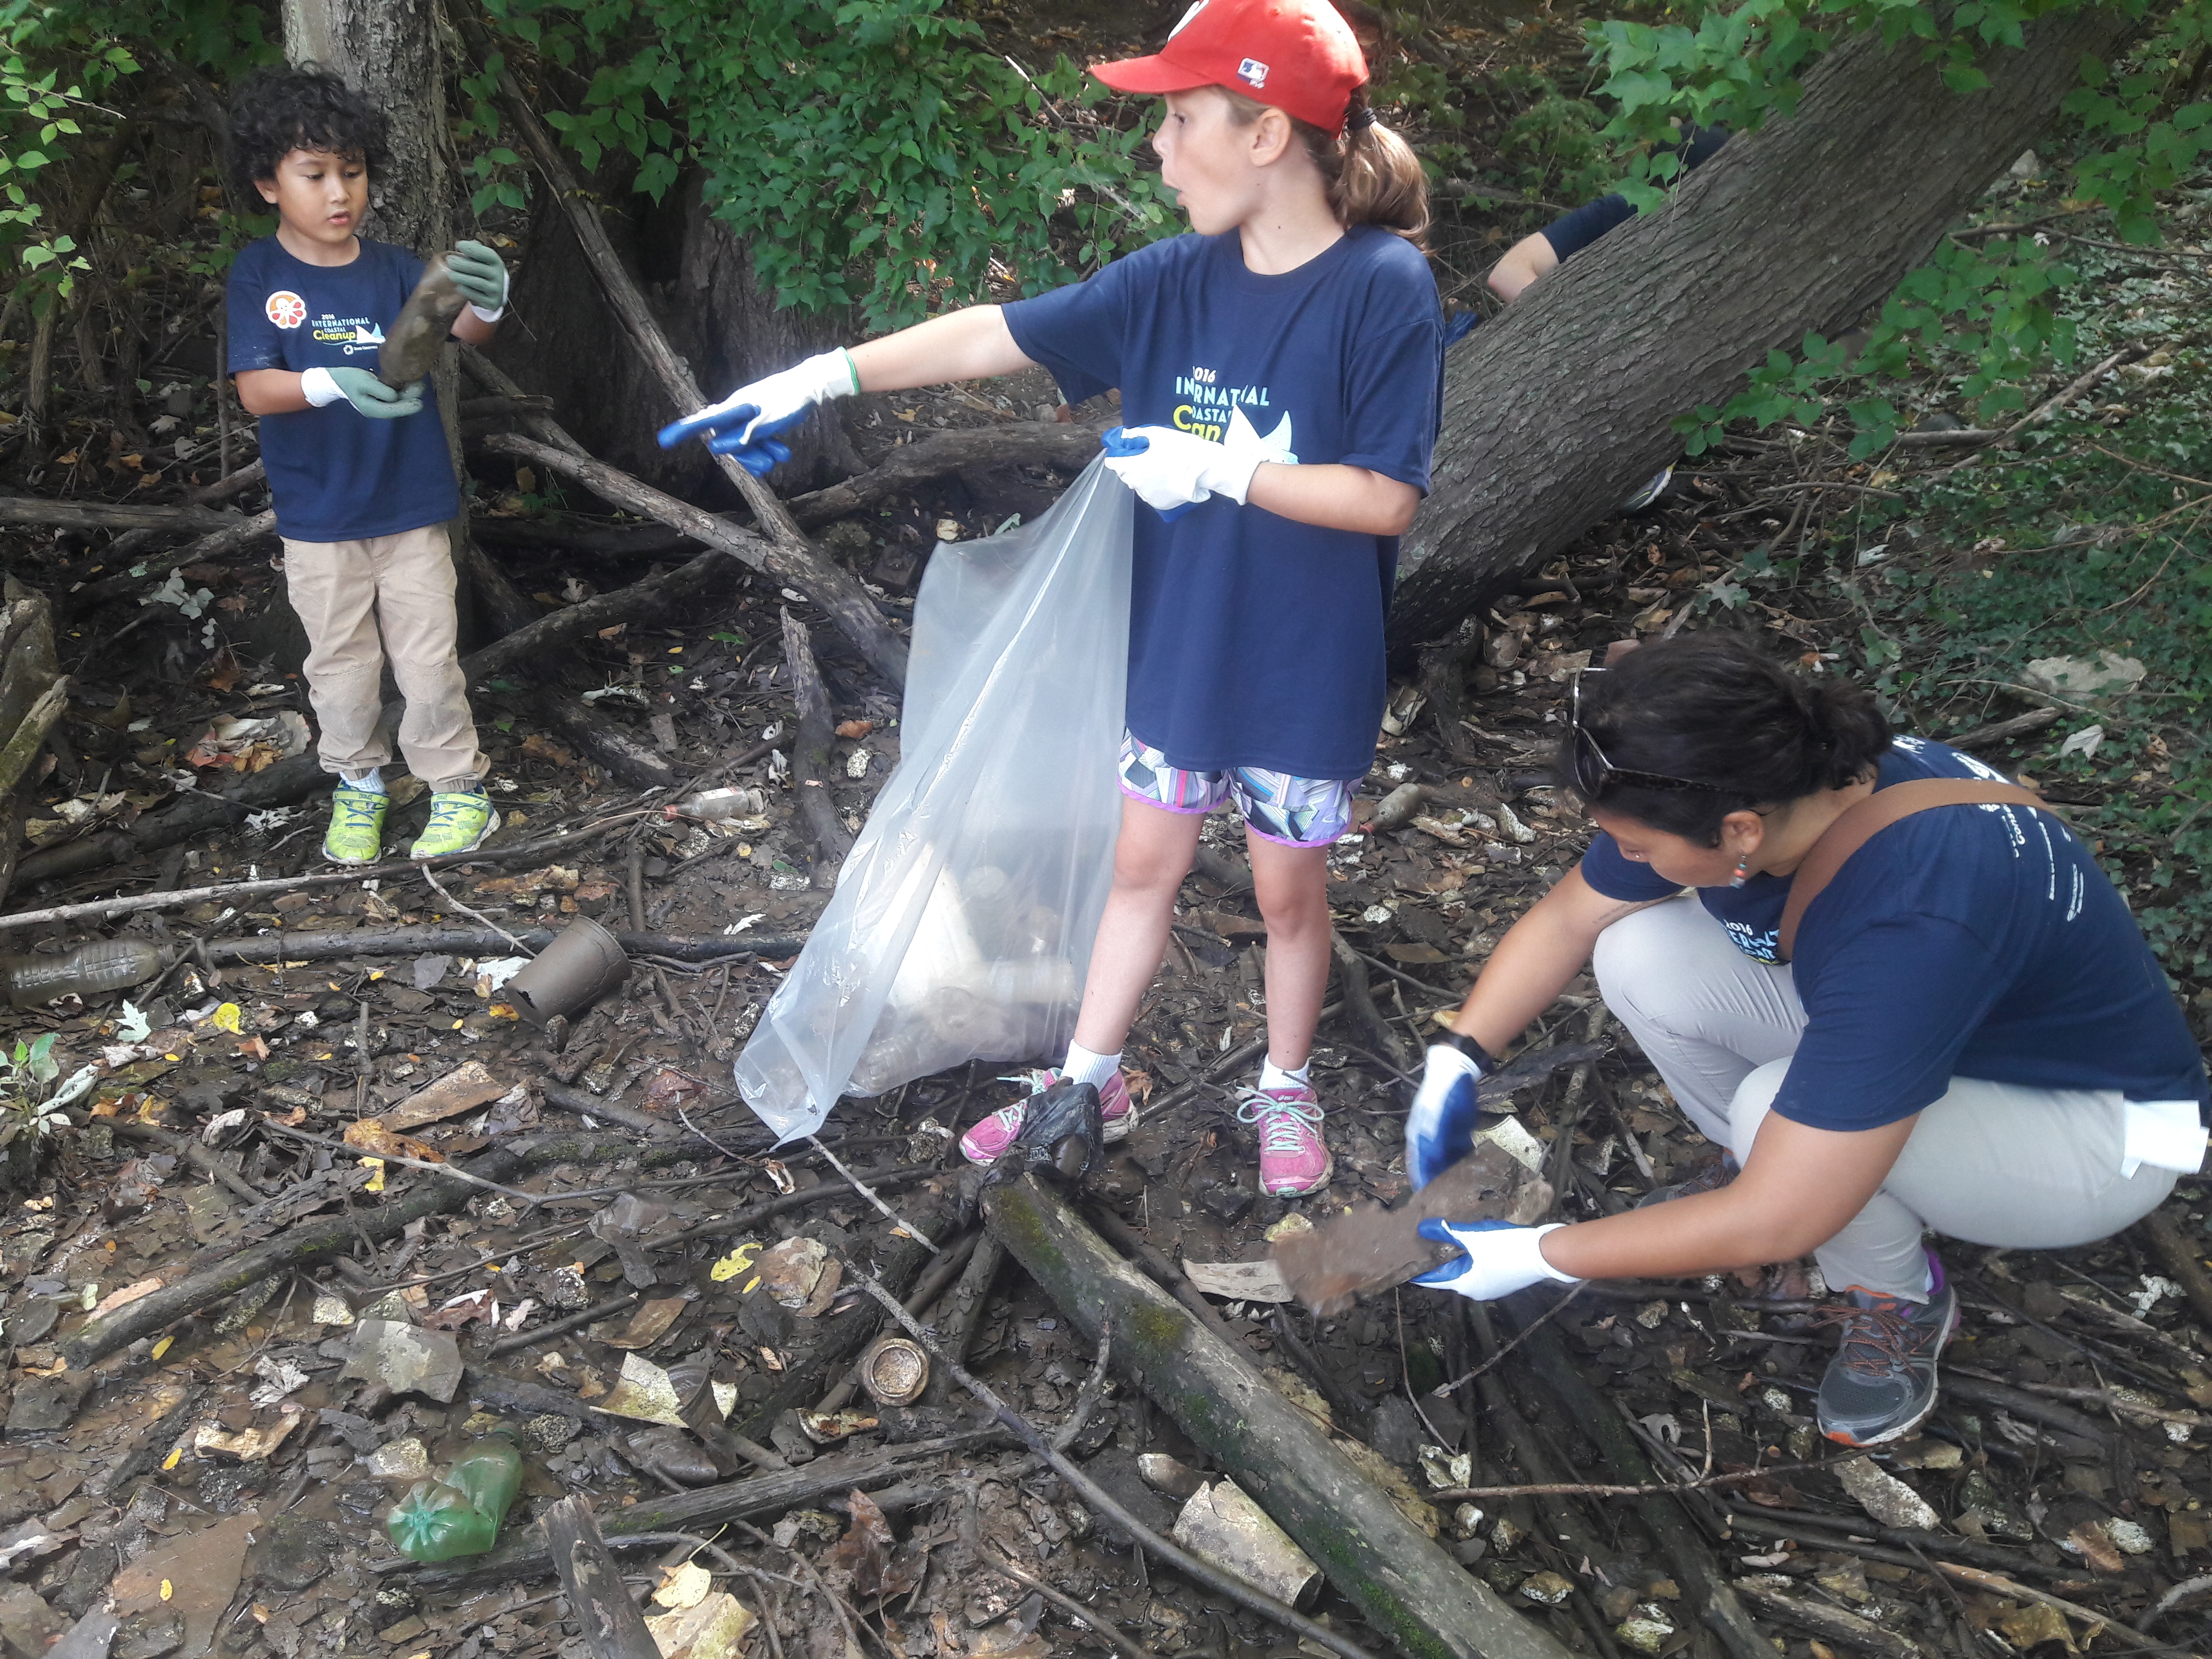 Kids cleaning up trash.